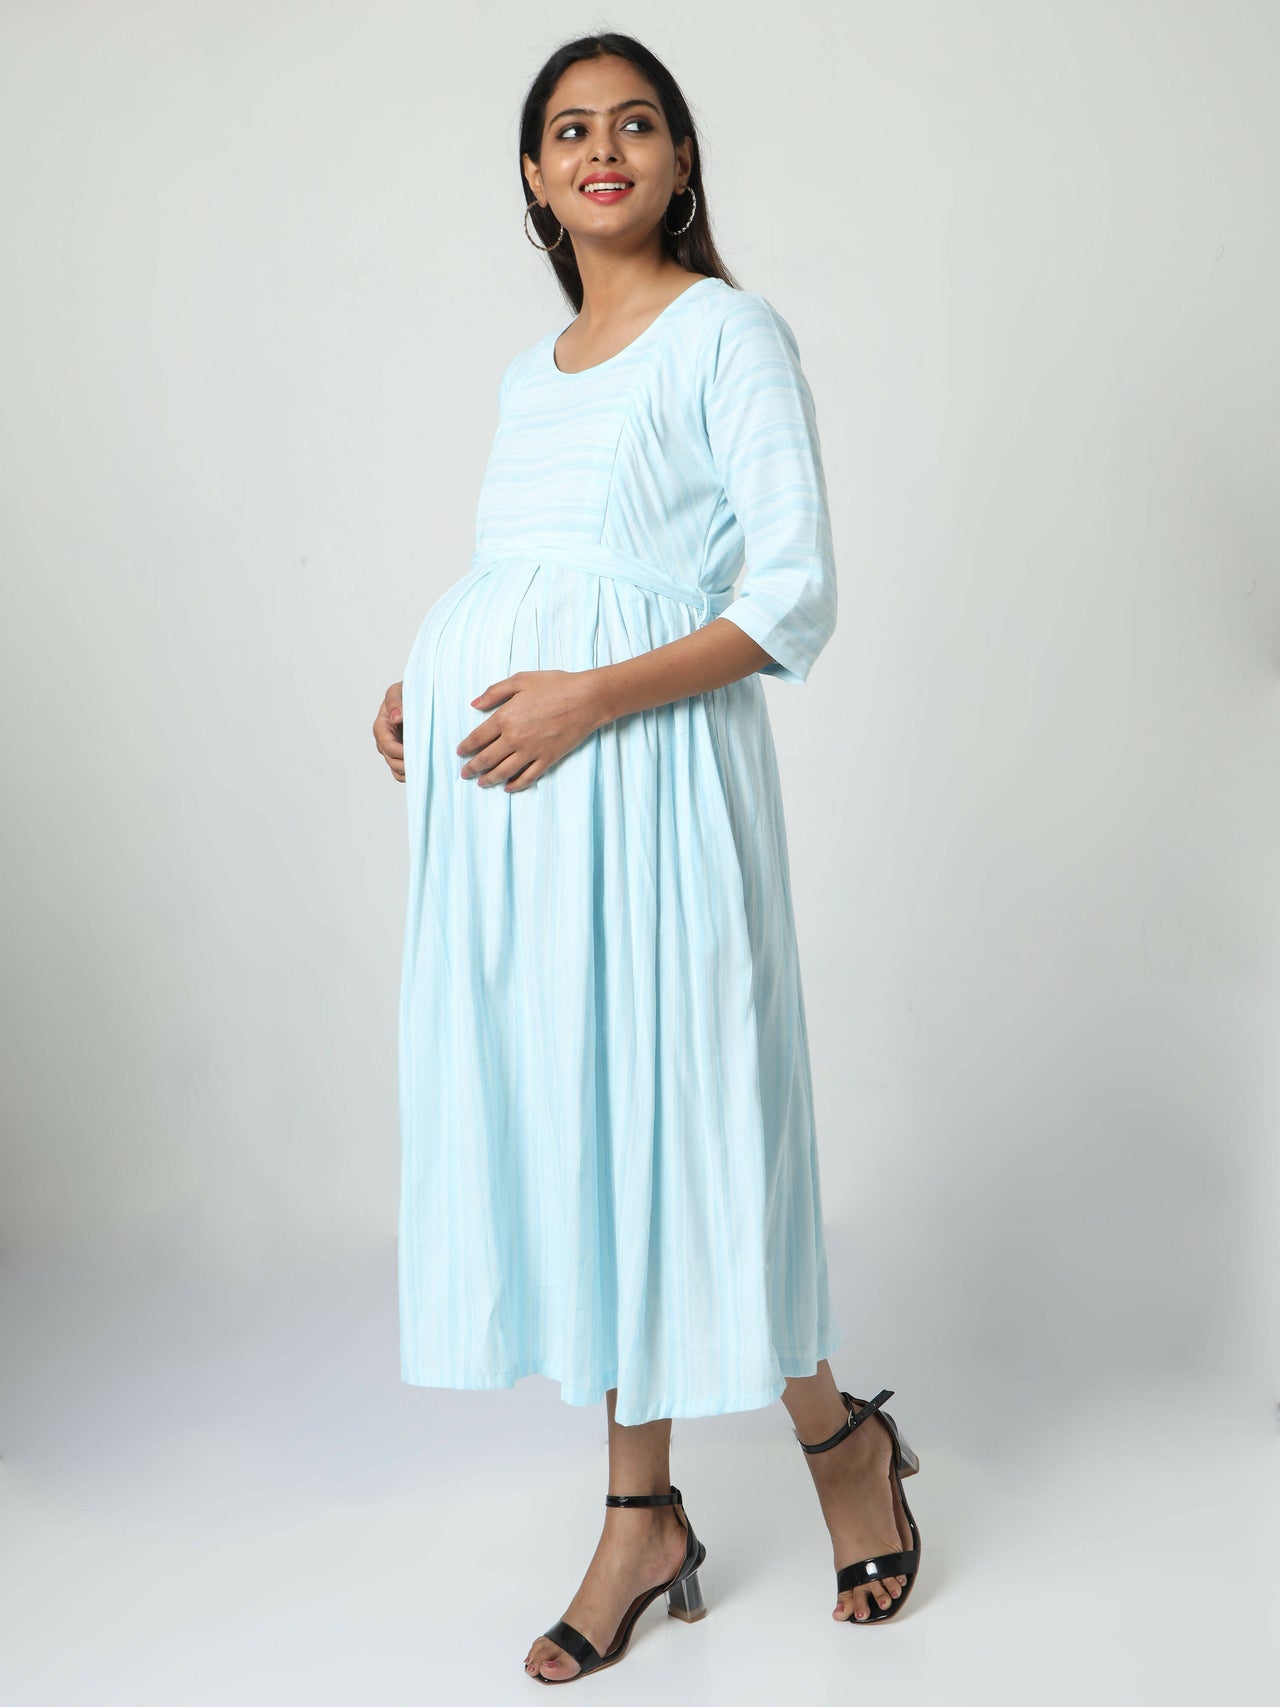 Manet Three Fourth Maternity Dress Striped With Concealed Zipper Nursing Access - Light Blue - Distacart